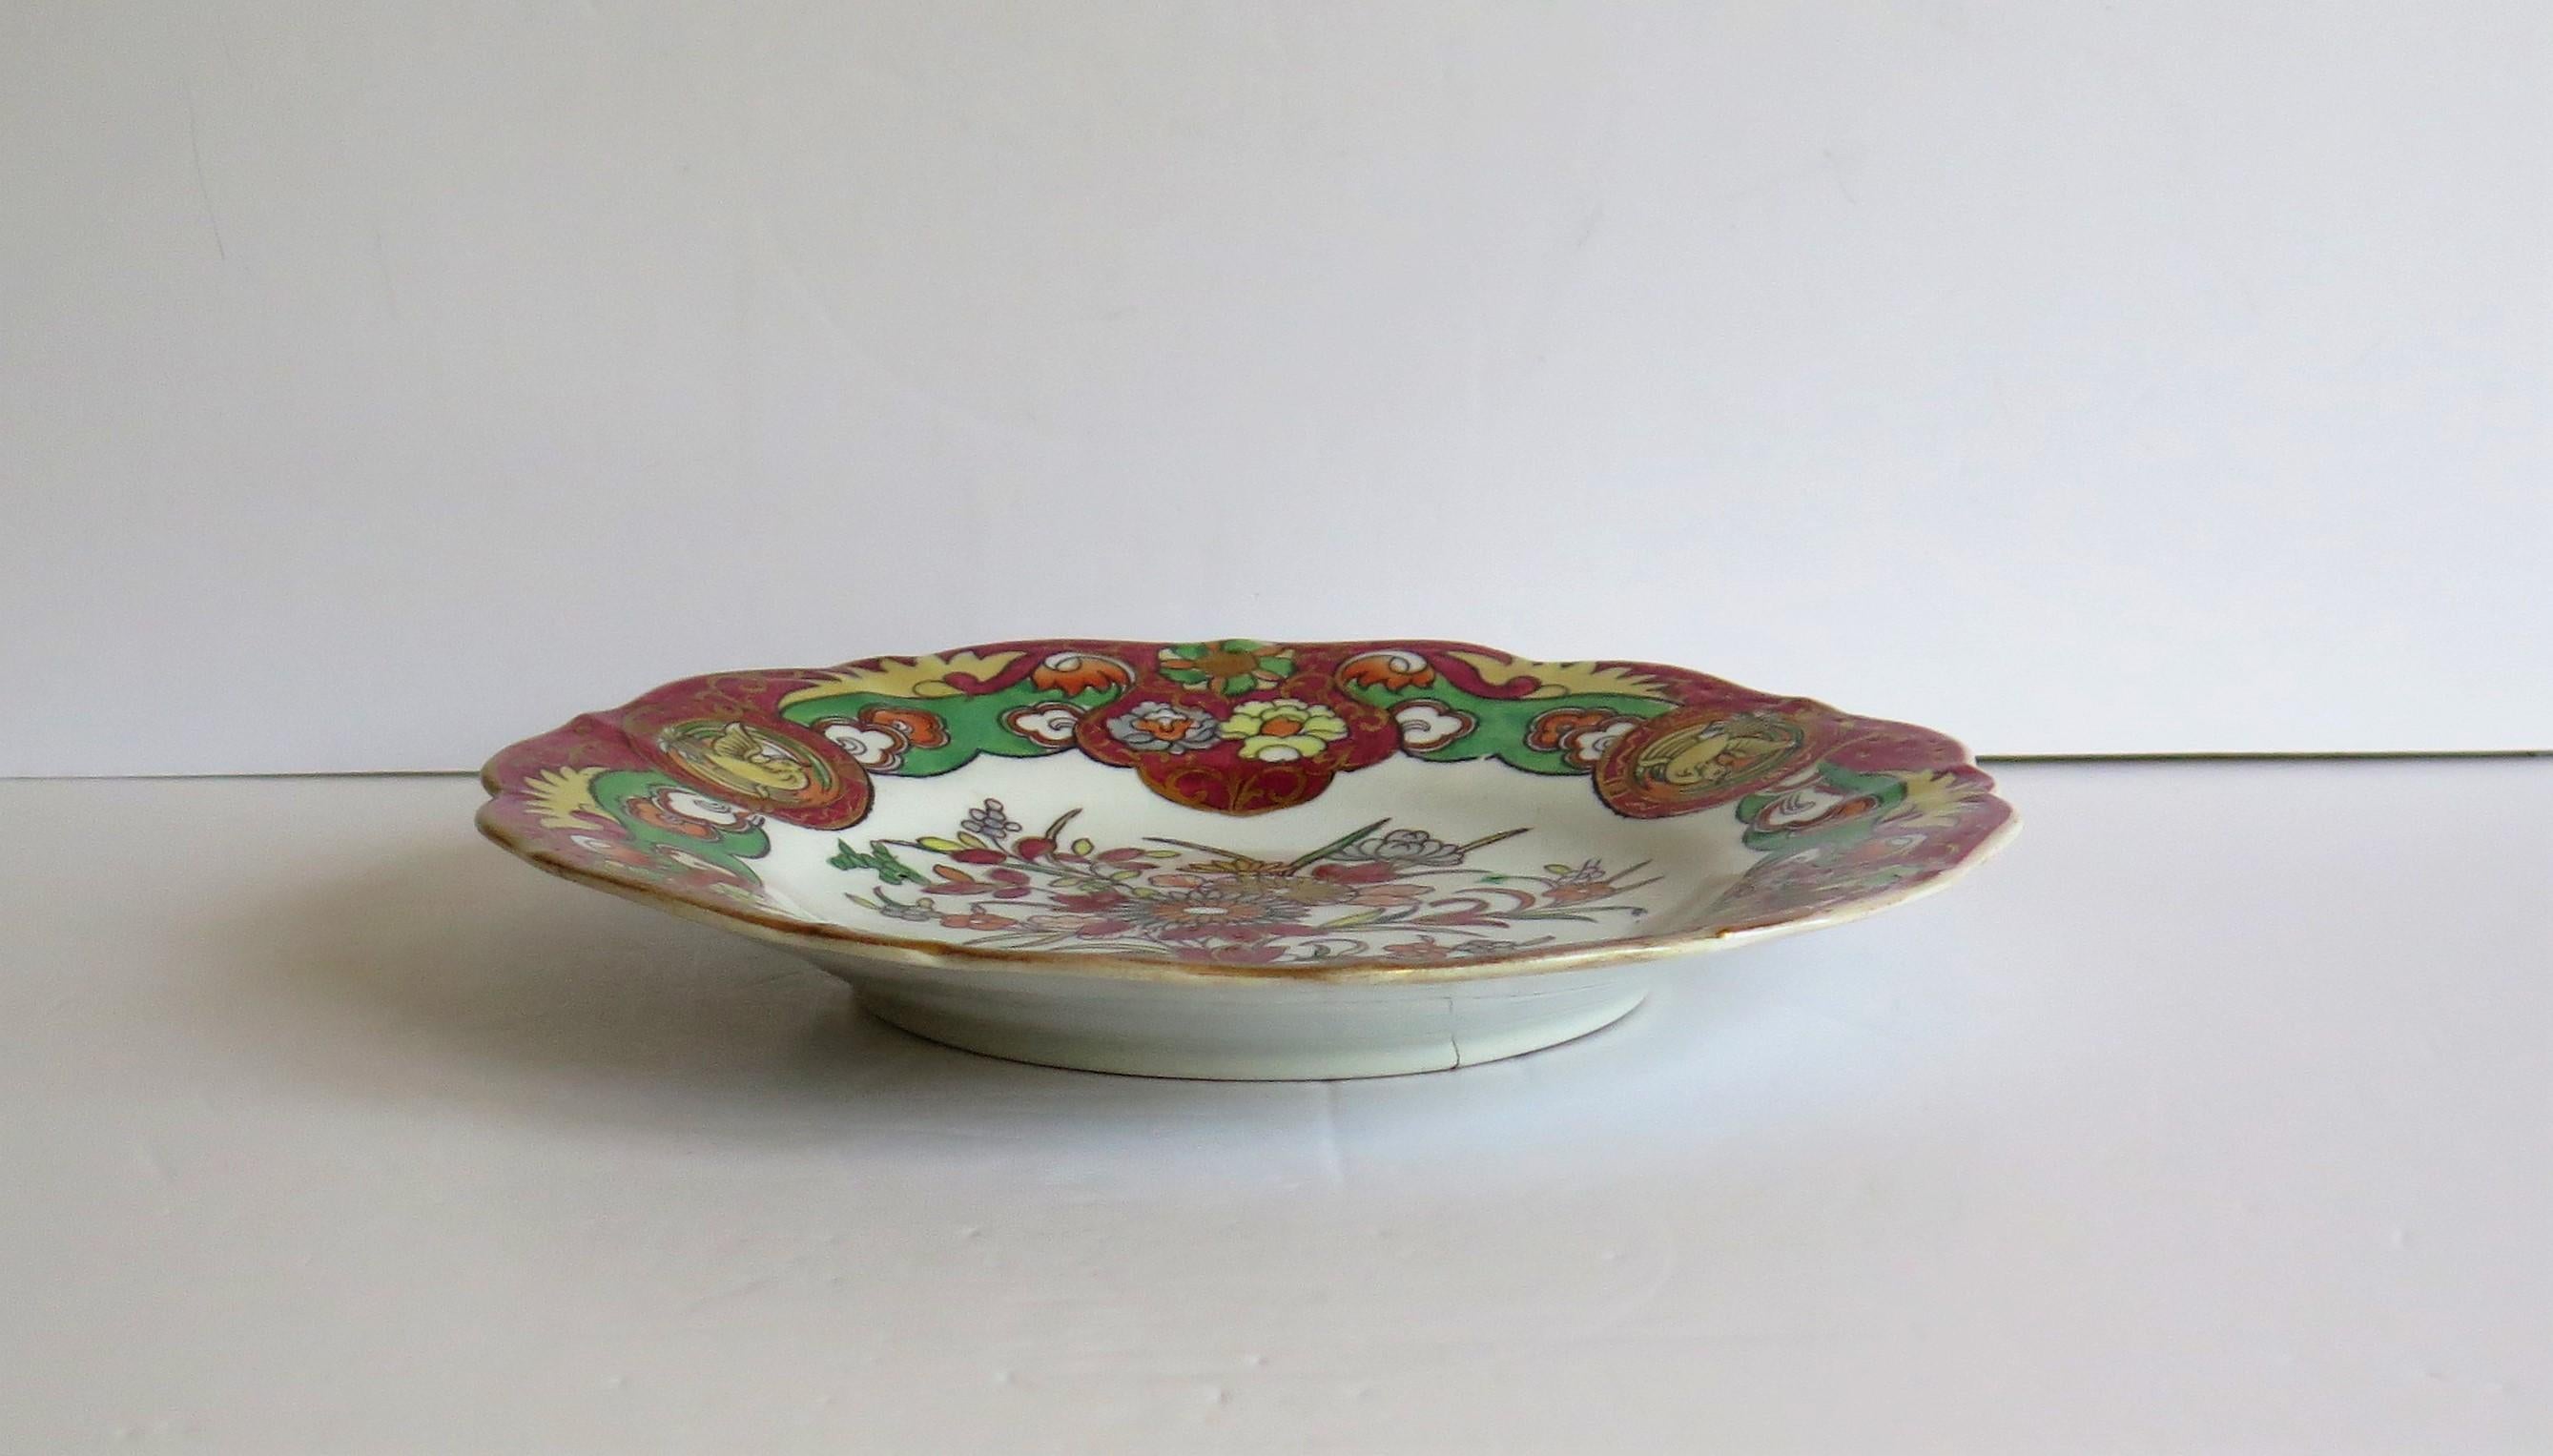 Mason's Ironstone Desert Dish or Plate in Fence Vase and Doves Pattern, Ca 1830 1